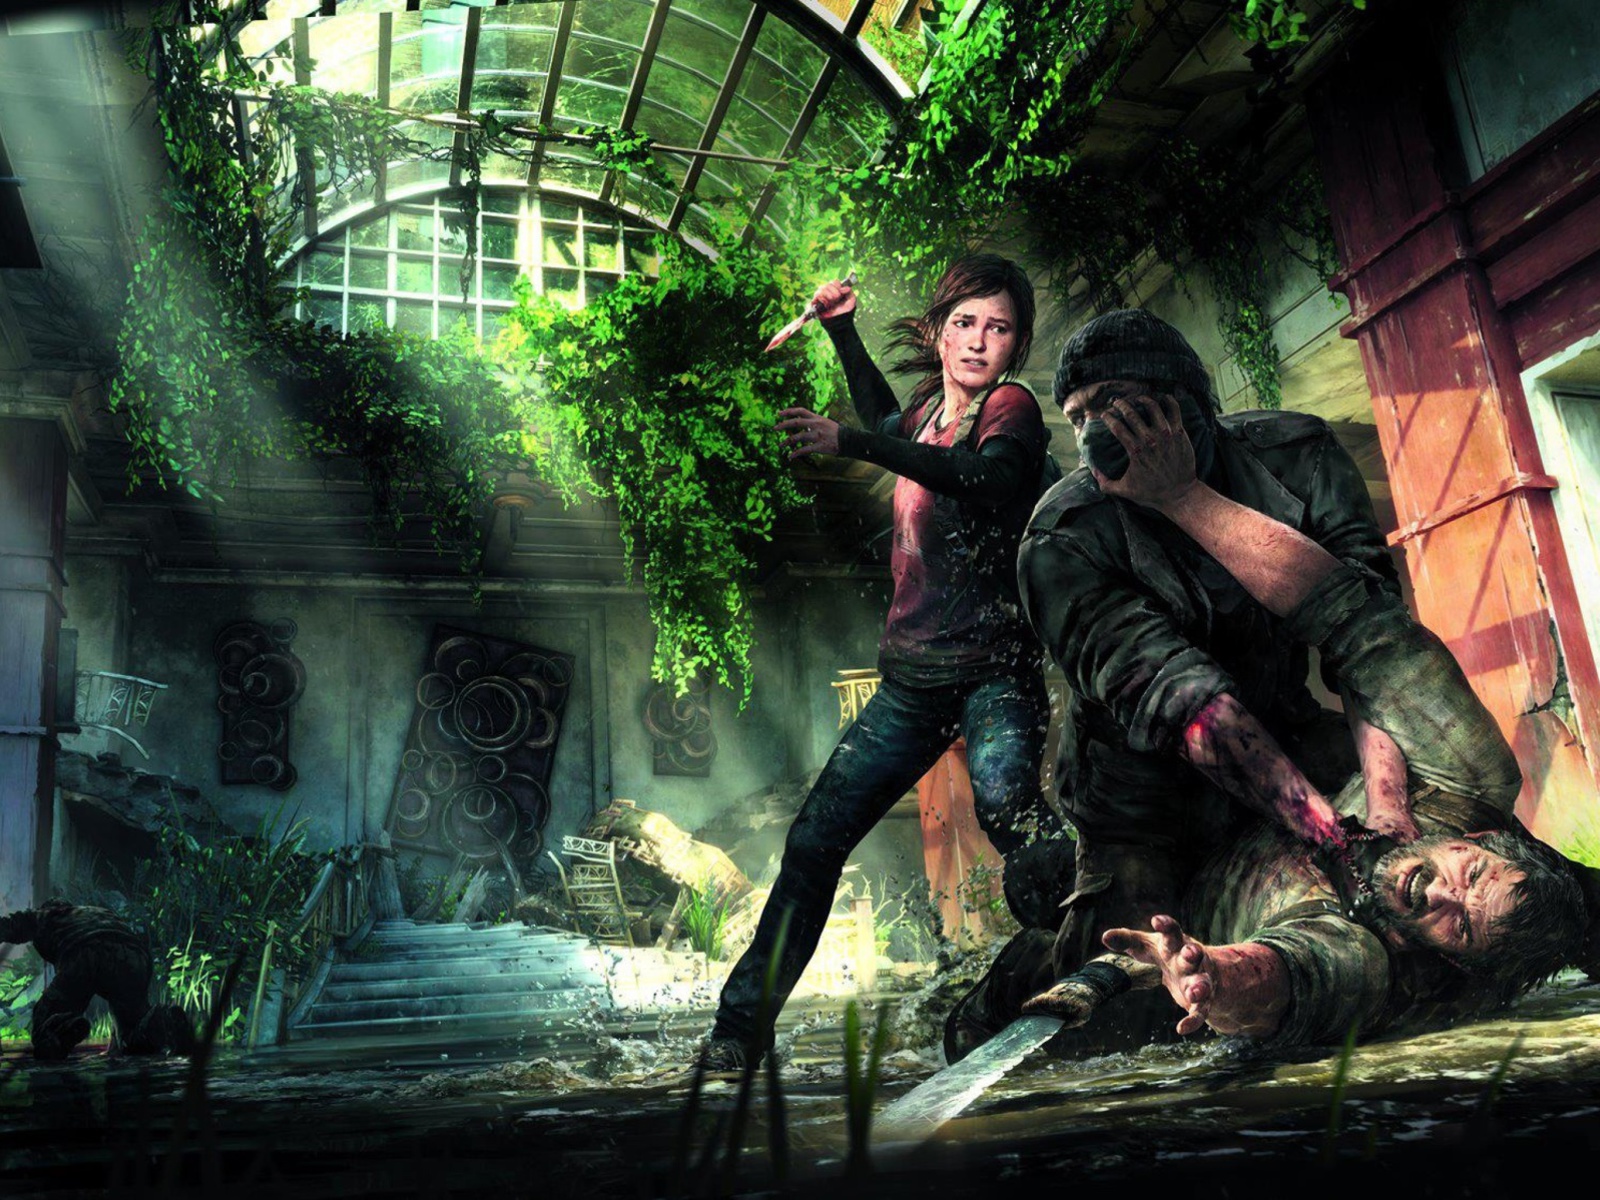 The Last Of Us Naughty Dog for Playstation 3 screenshot #1 1600x1200